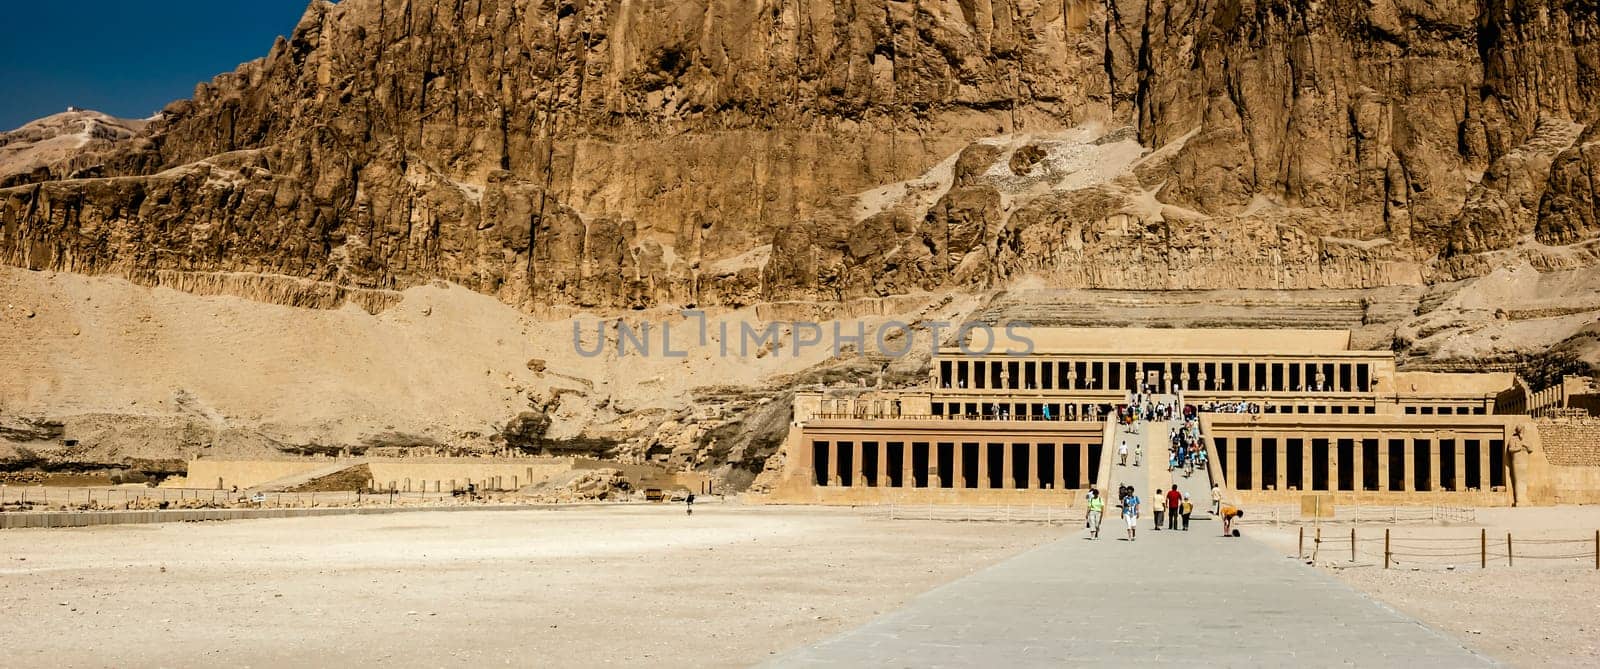 Tourists at Hatshepsut temple by Giamplume